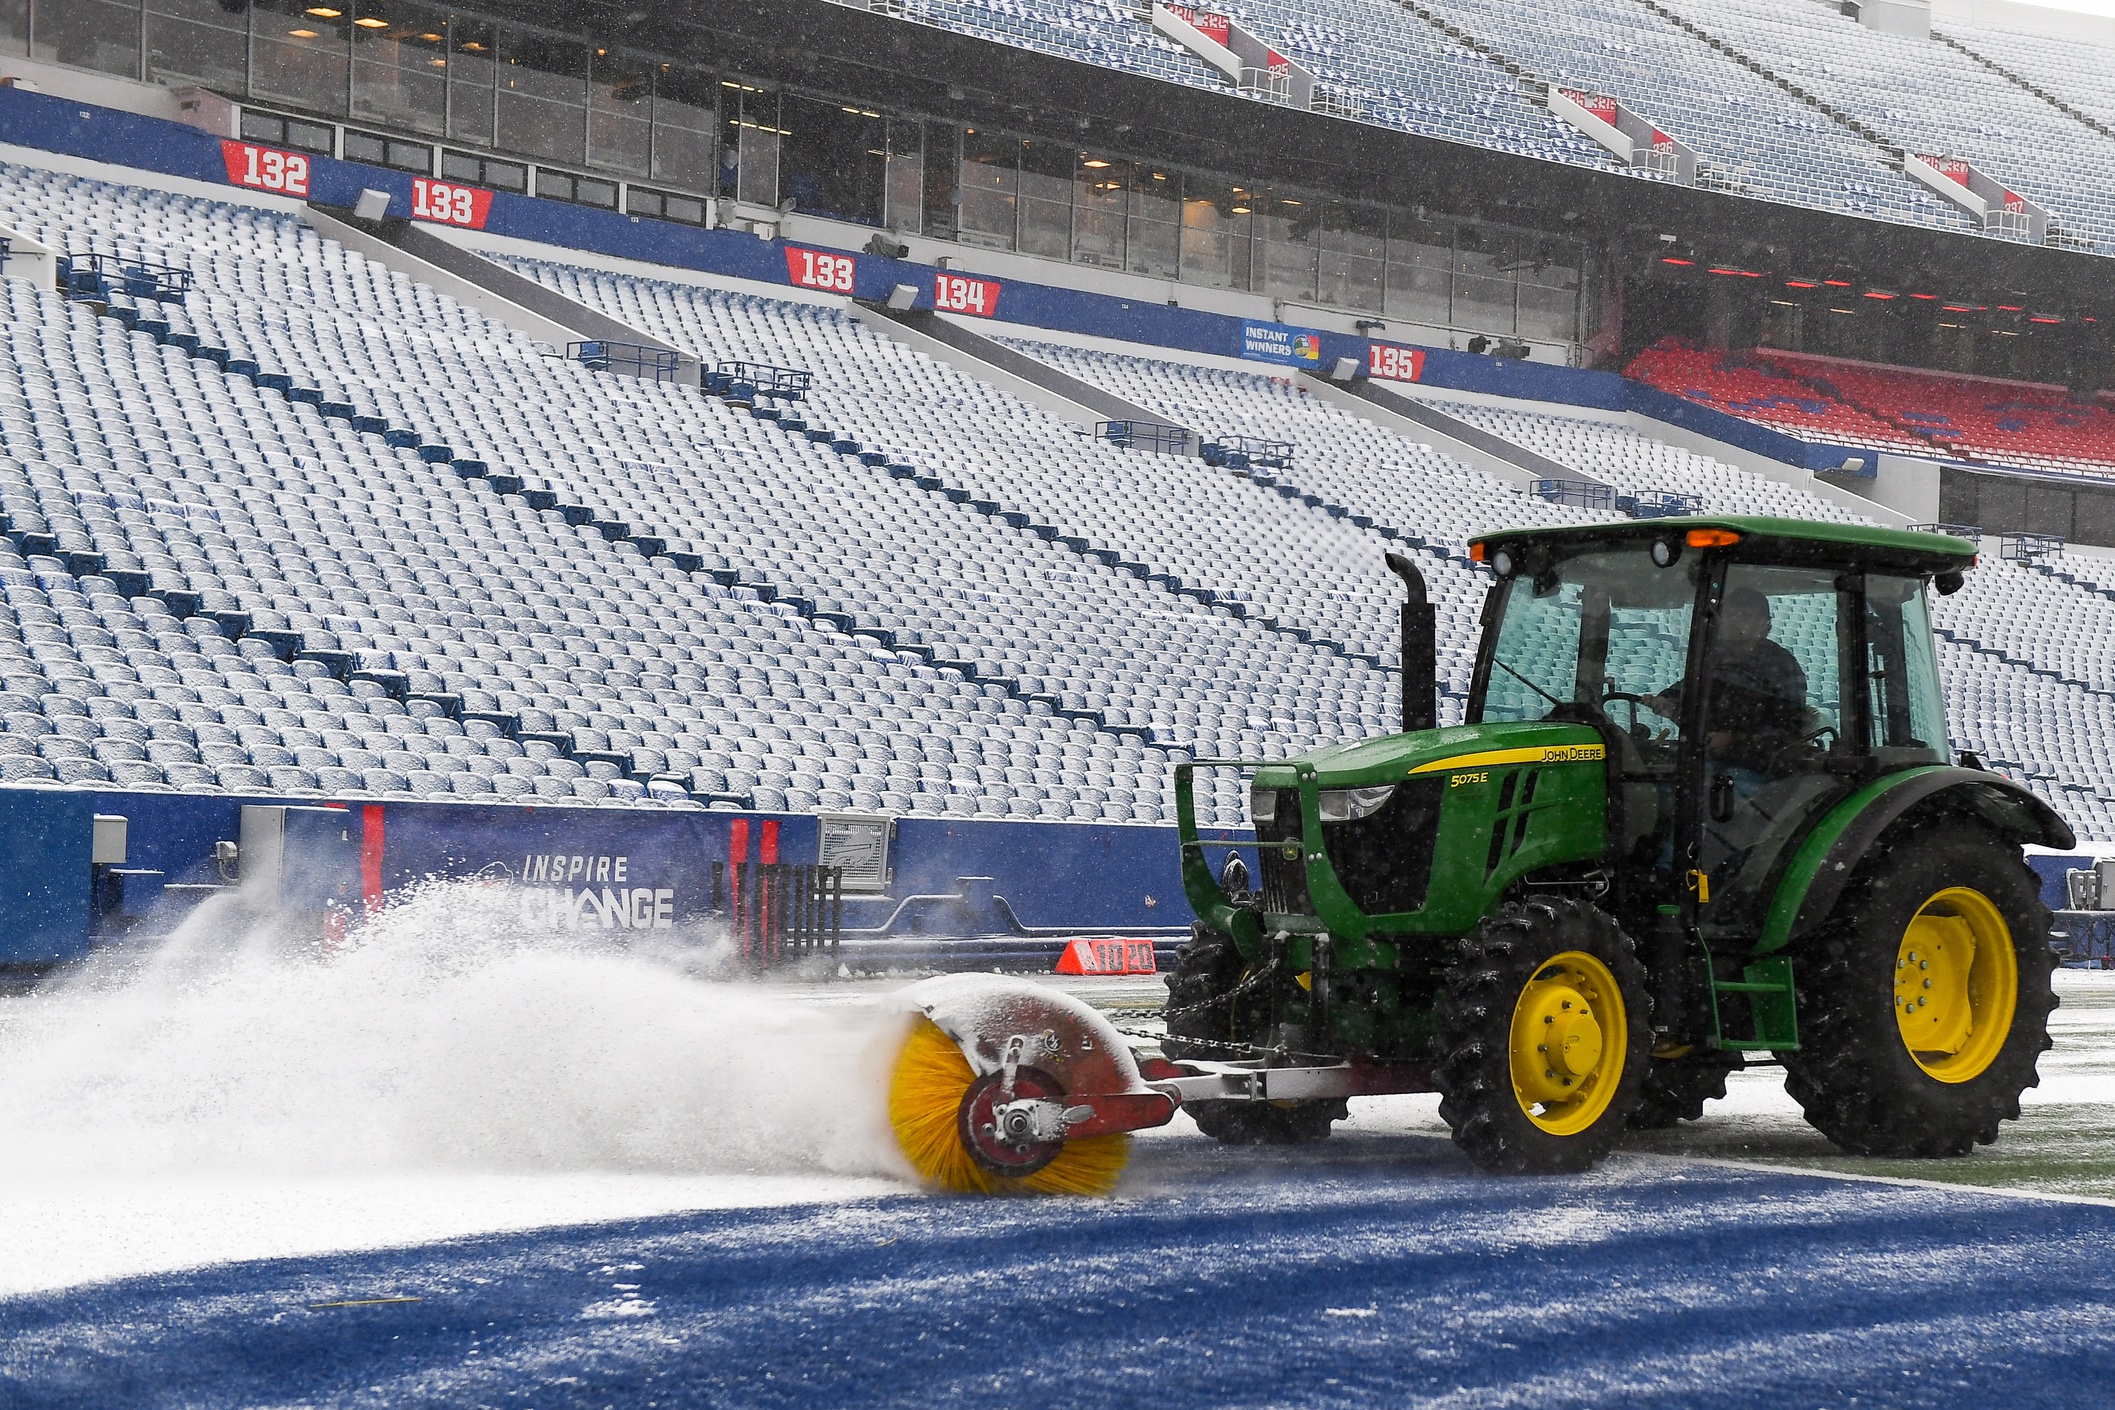 Look: Major Snowstorm Forecasted For Bengals-Bills Playoff Game Today 